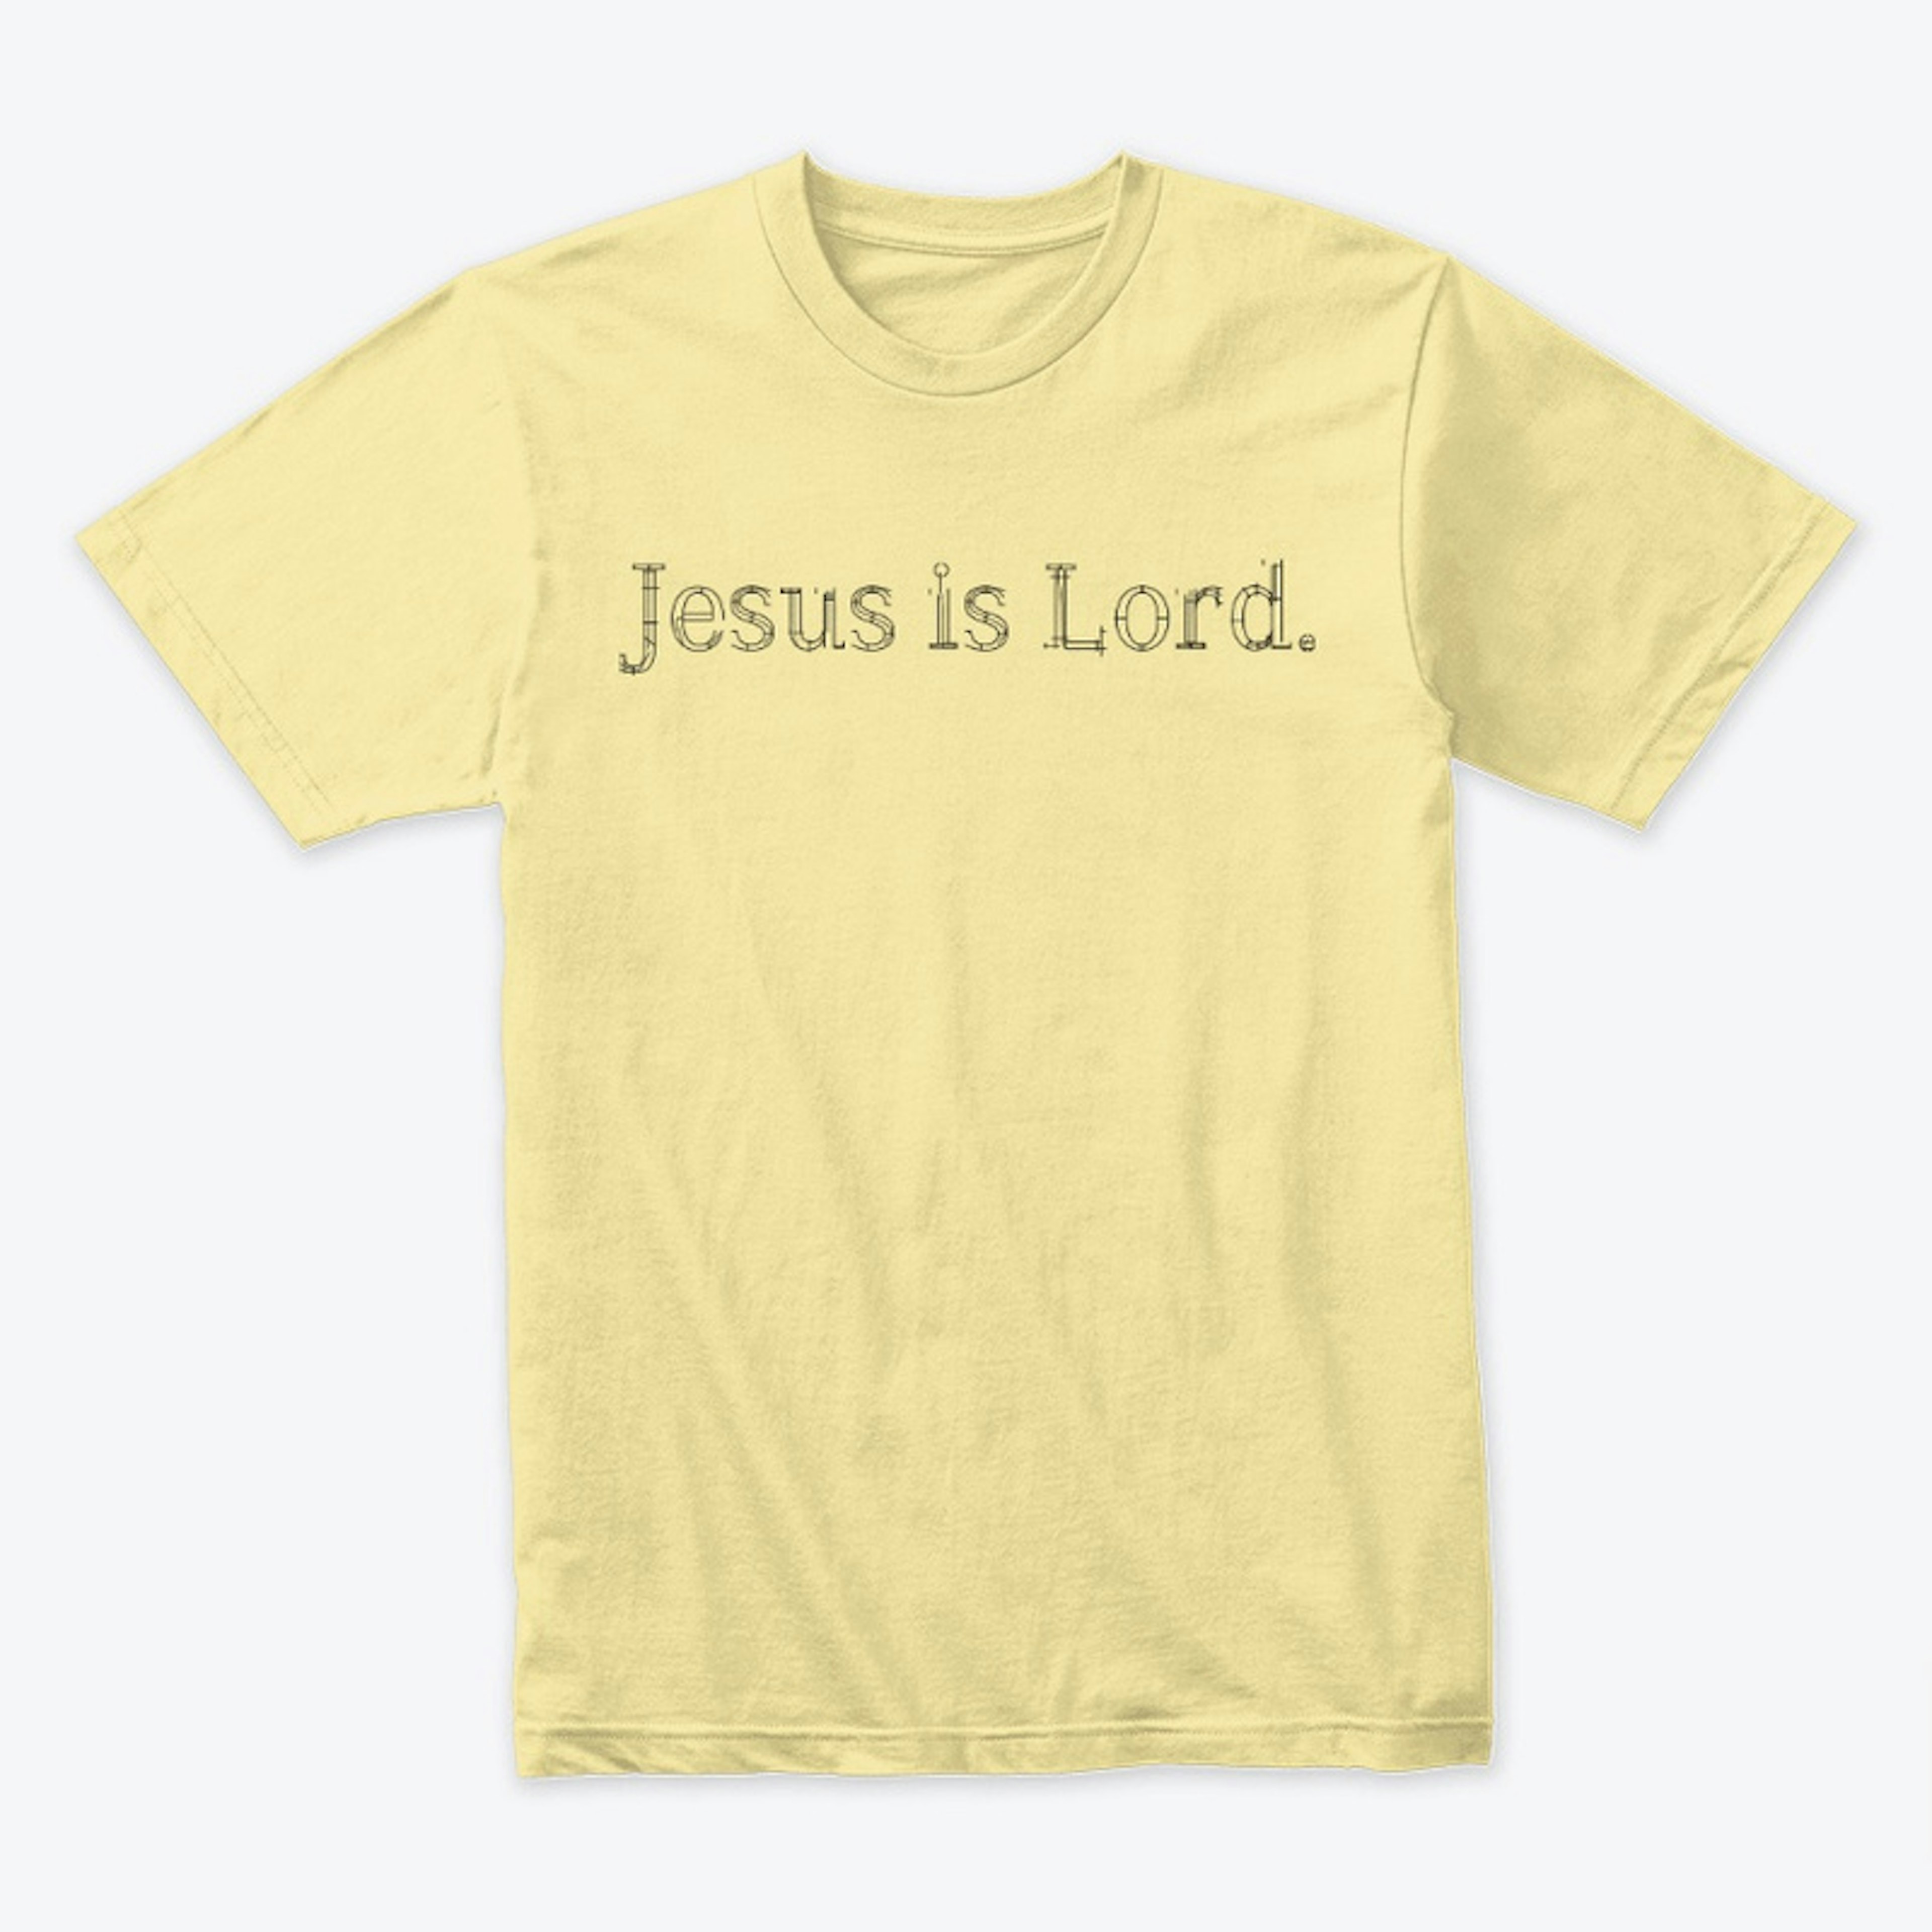 Jesus is Lord.